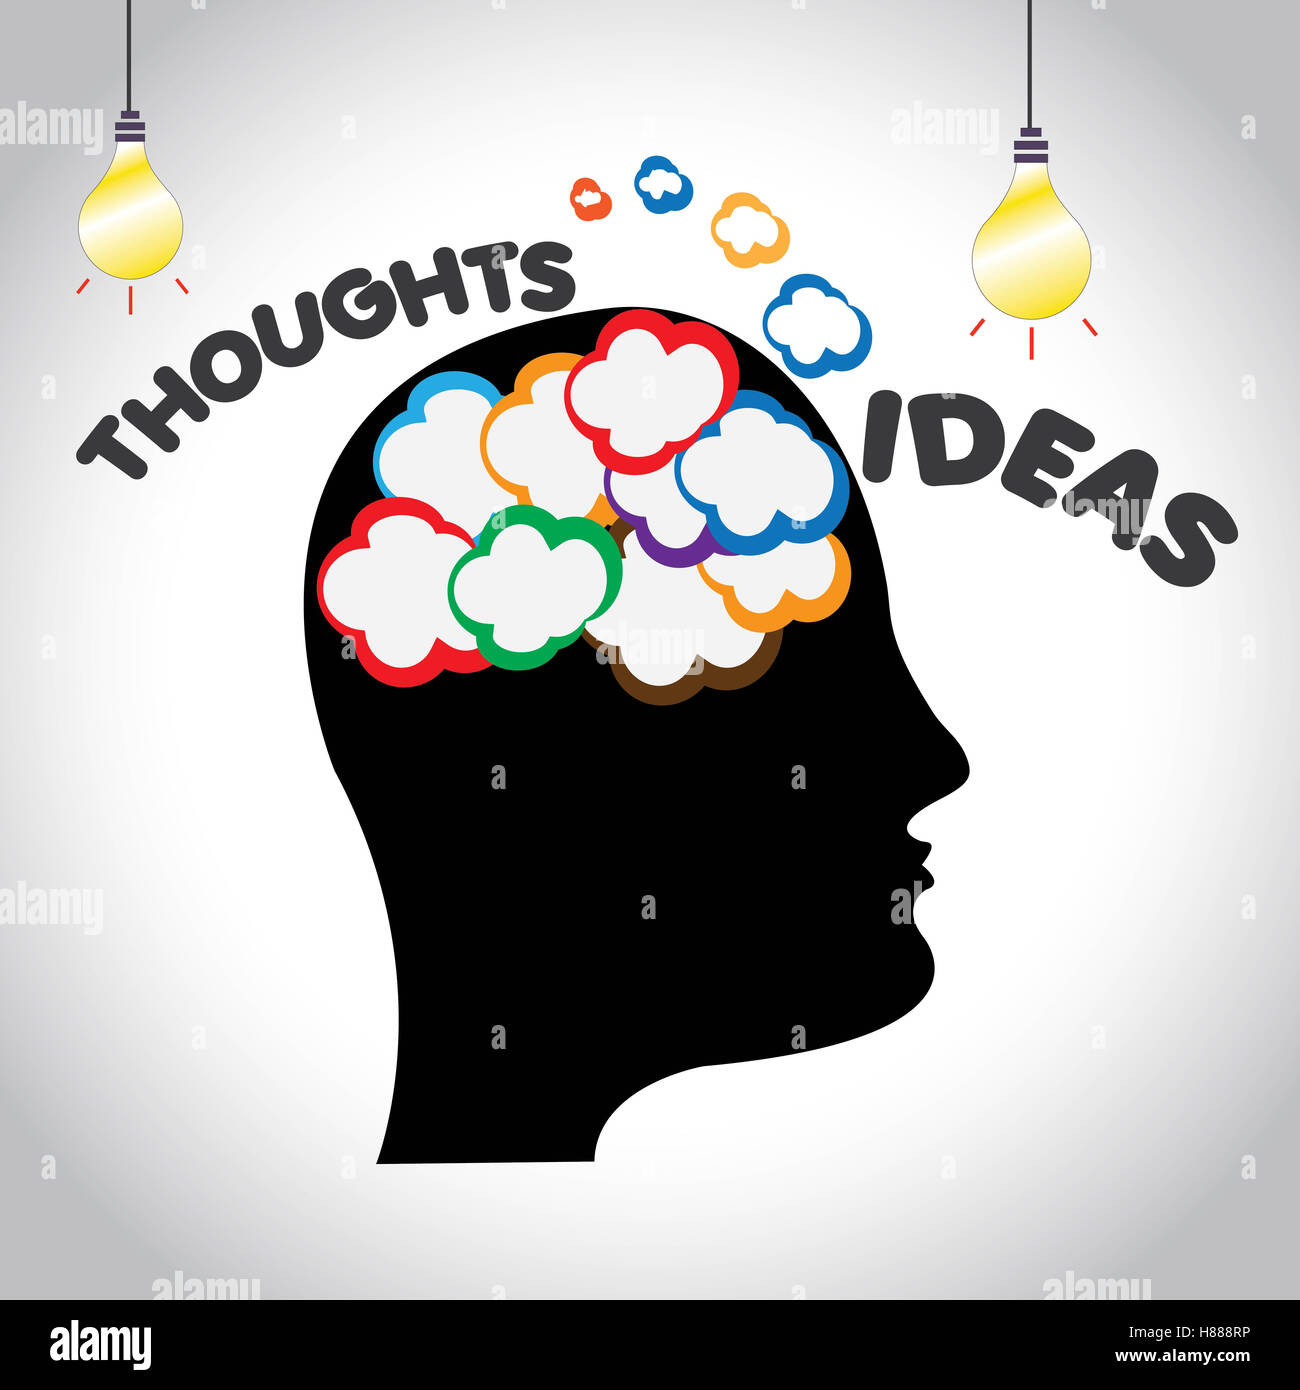 Concept of creative thoughts and ideas in human brain - illustration Stock Photo